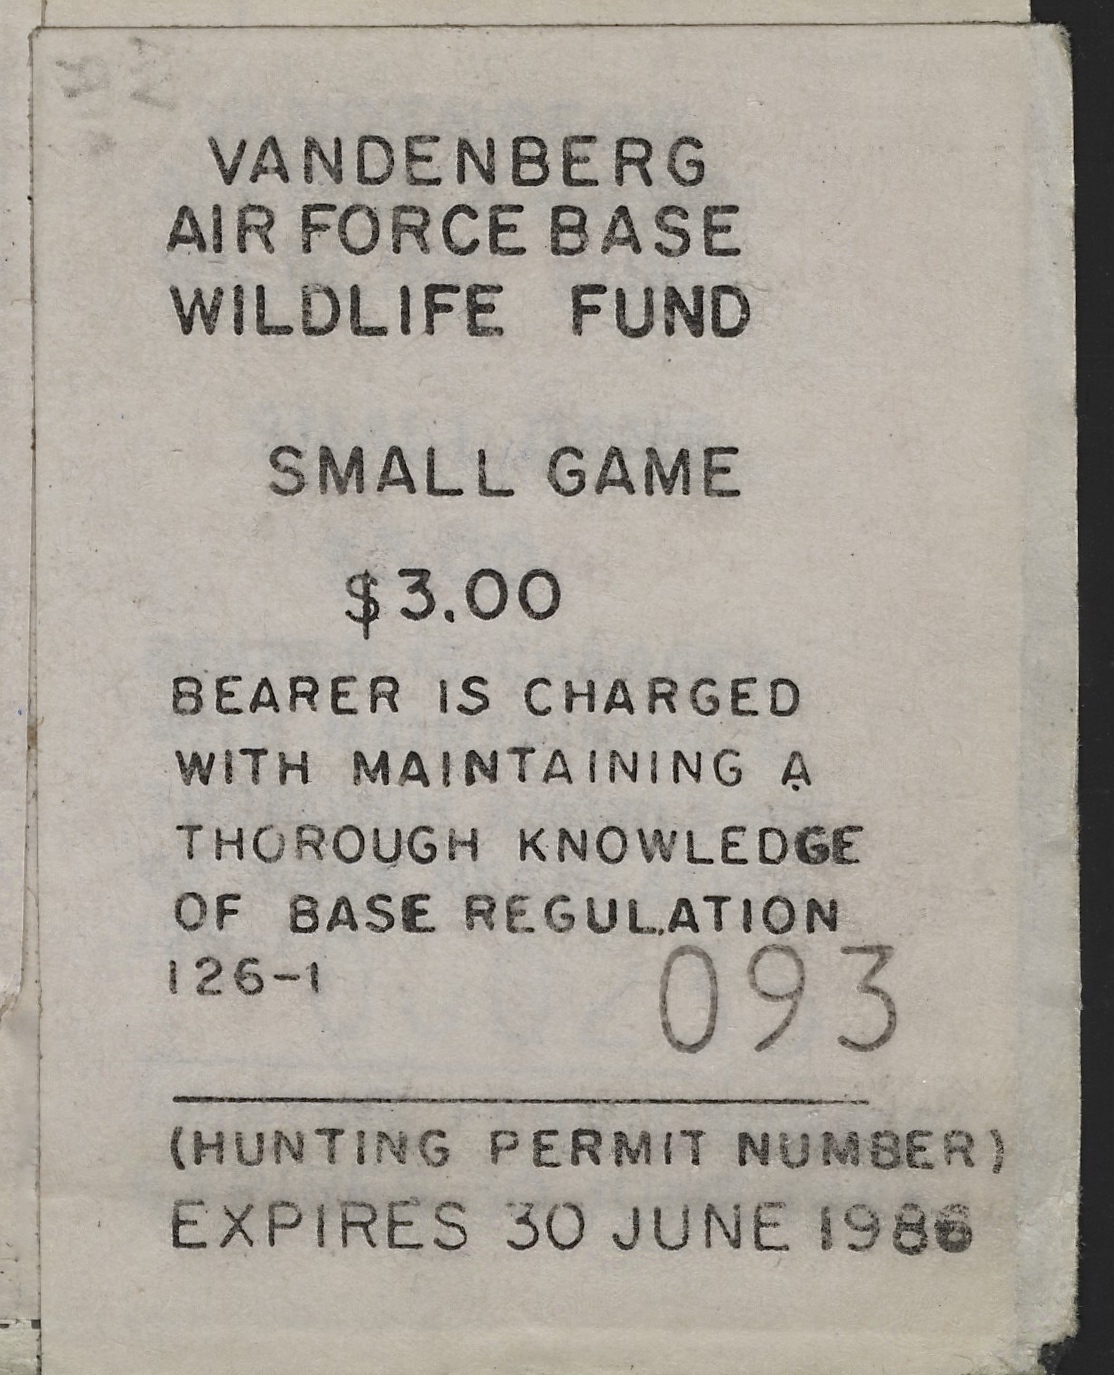 1985-86 VAFB Small Game